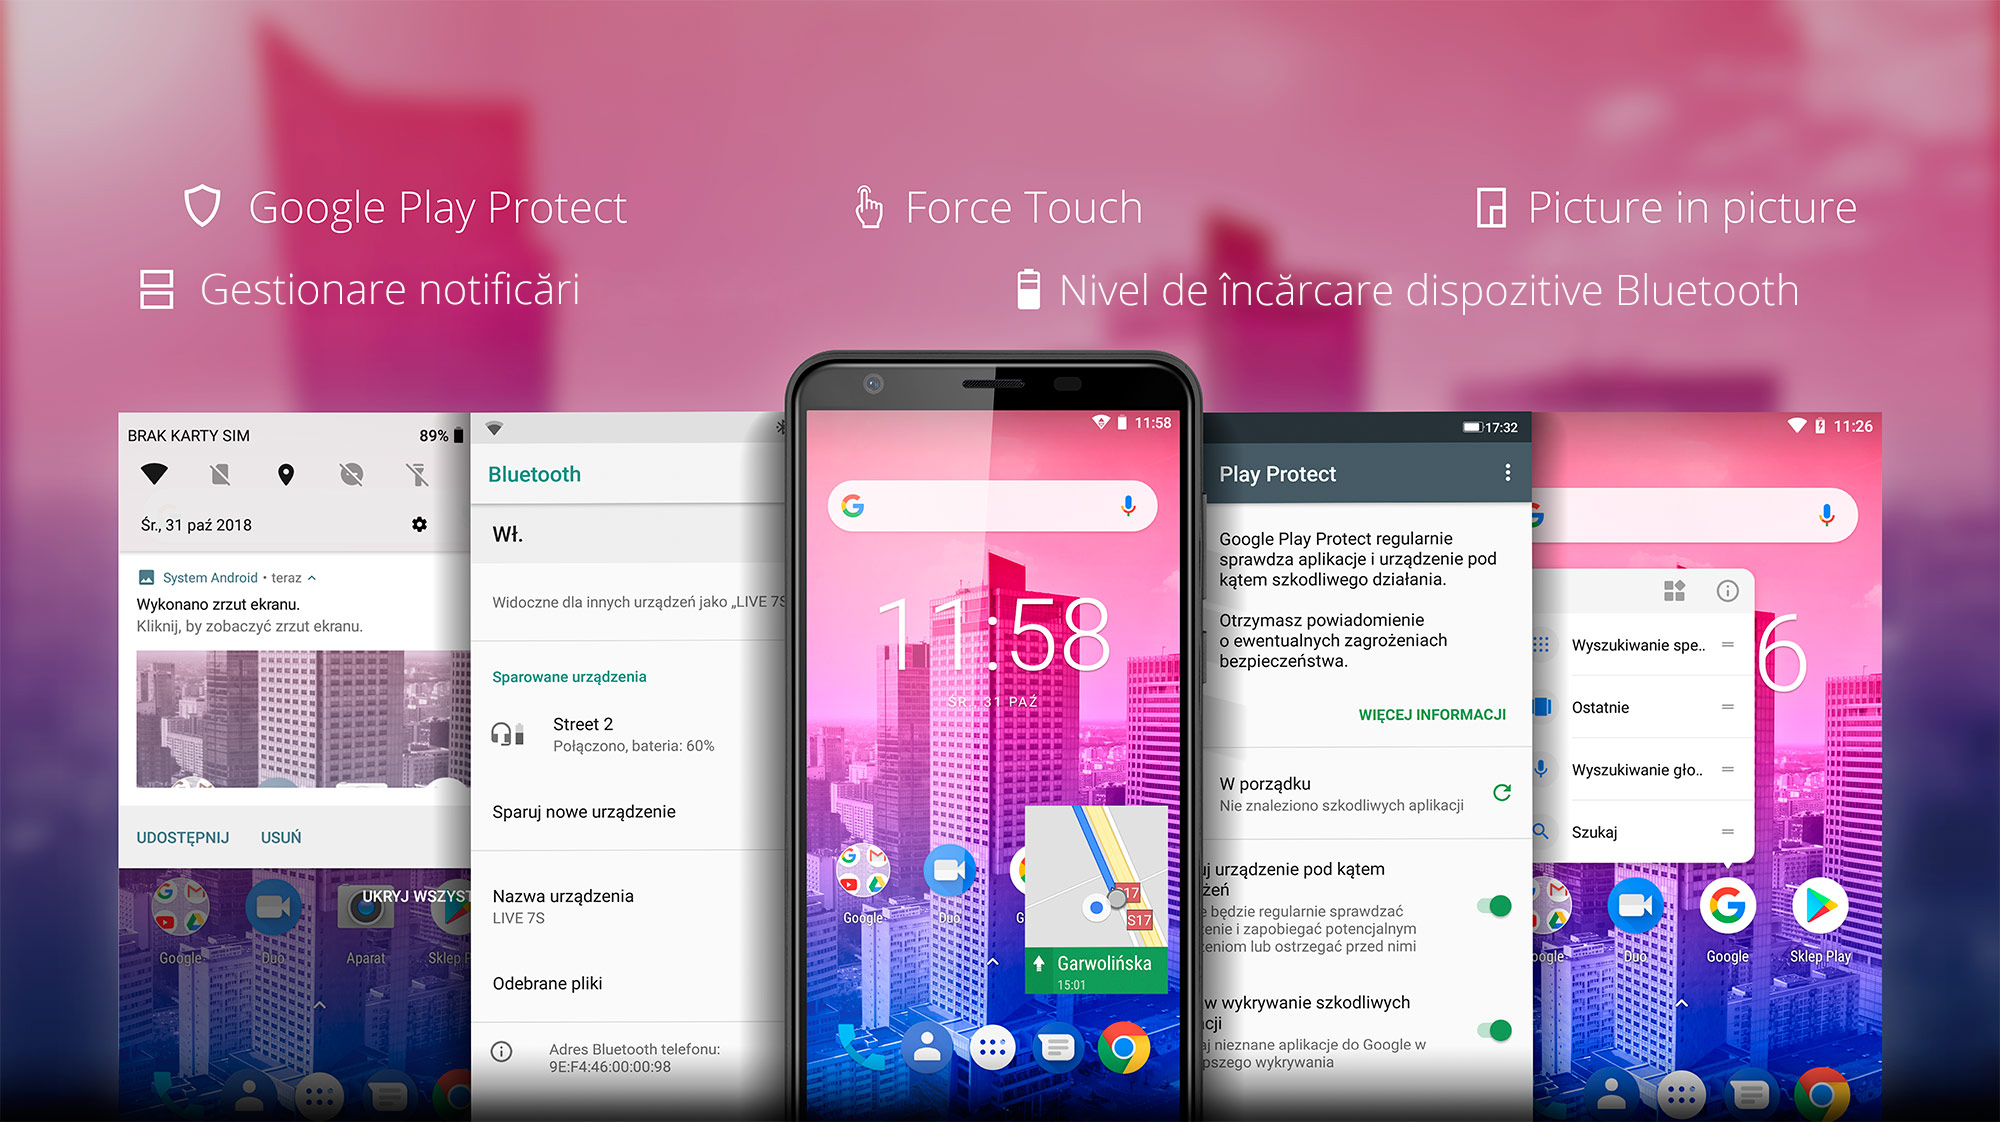 Google Play Protect | Force Touch | Picture in picture | Gestionare notificari | Nivel de incarcare dispozitive Bluetooth 